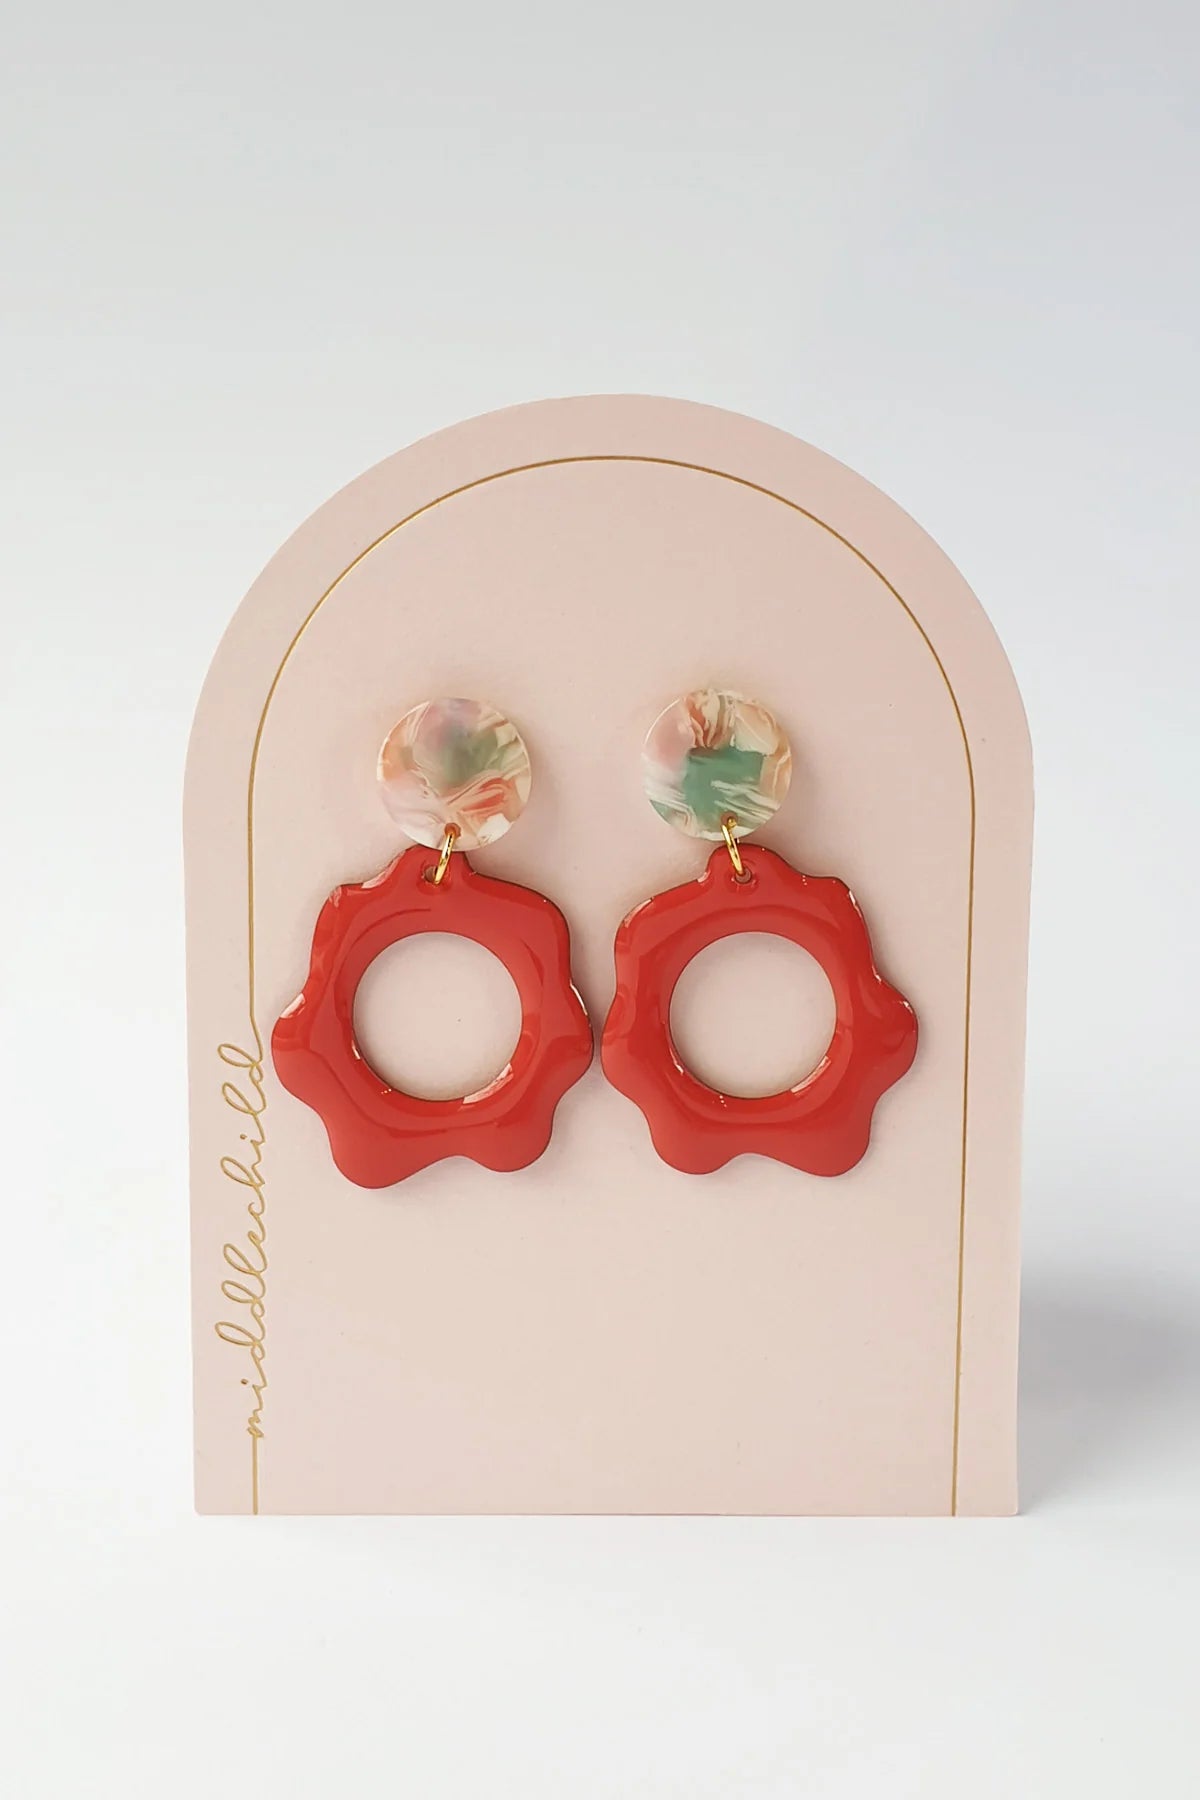 Middle Child - Floret Earrings